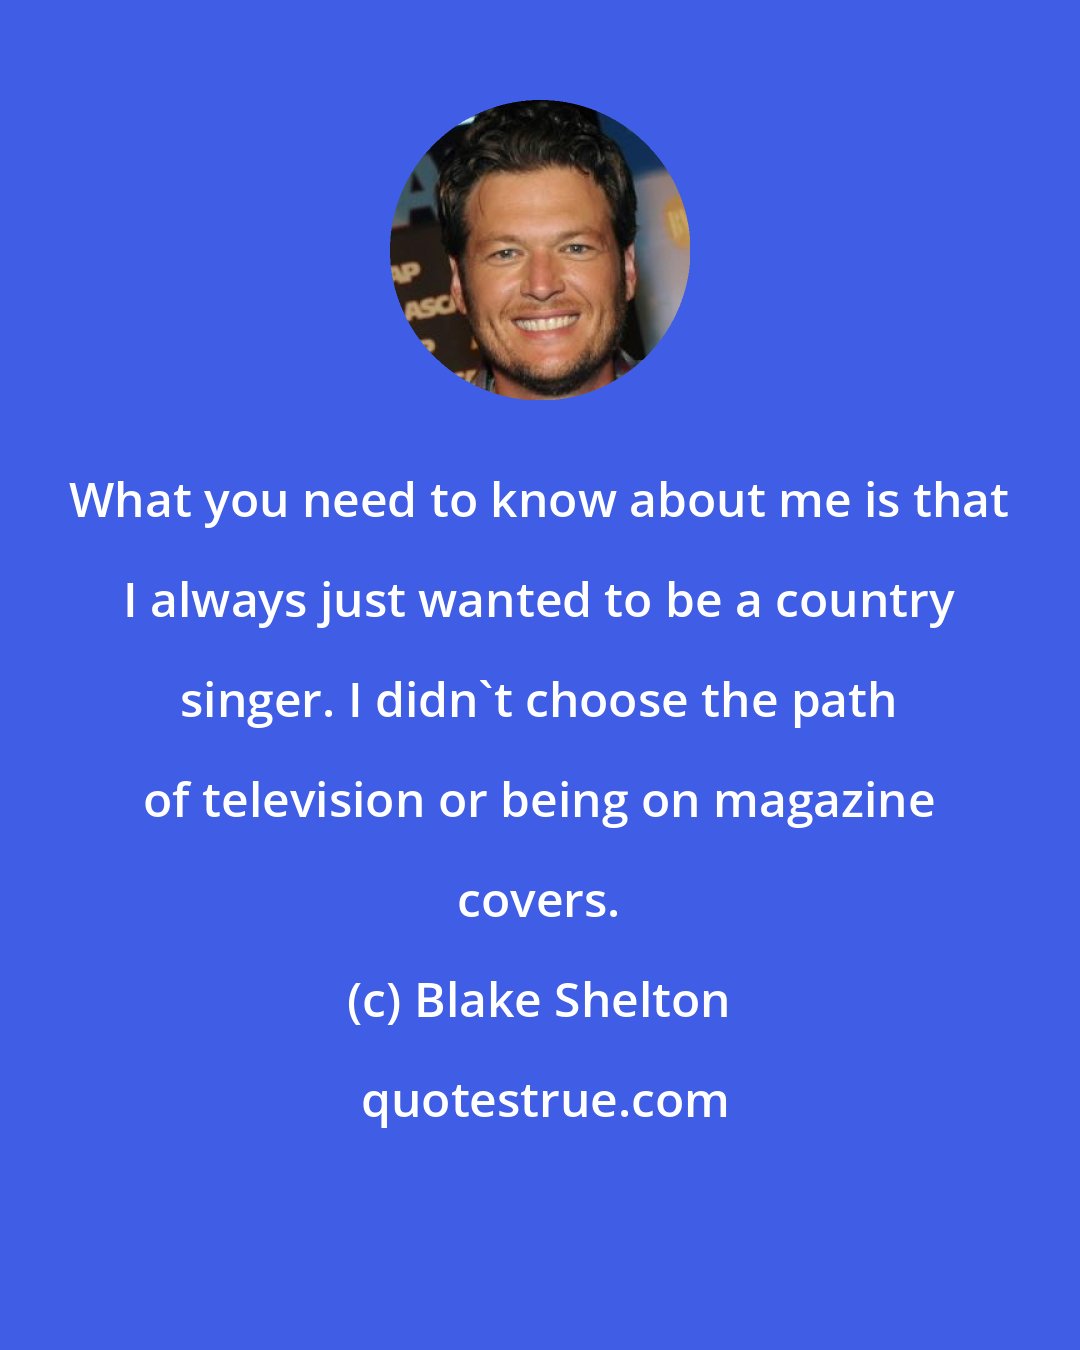 Blake Shelton: What you need to know about me is that I always just wanted to be a country singer. I didn't choose the path of television or being on magazine covers.